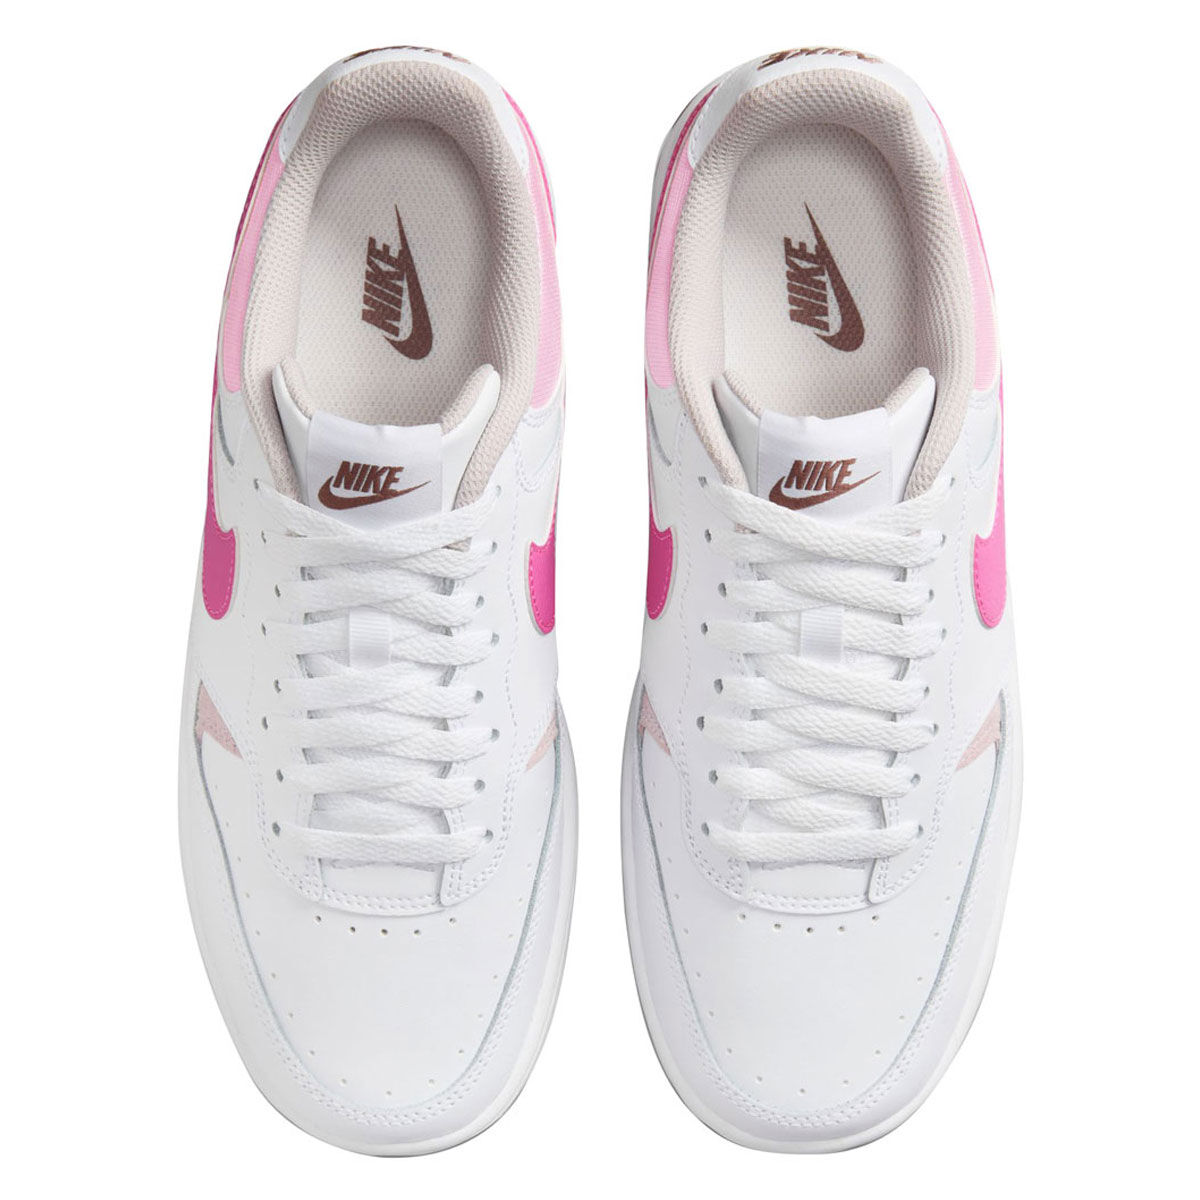 Nike Gamma Force Womens Casual Shoes, White/Pink, rebel_hi-res